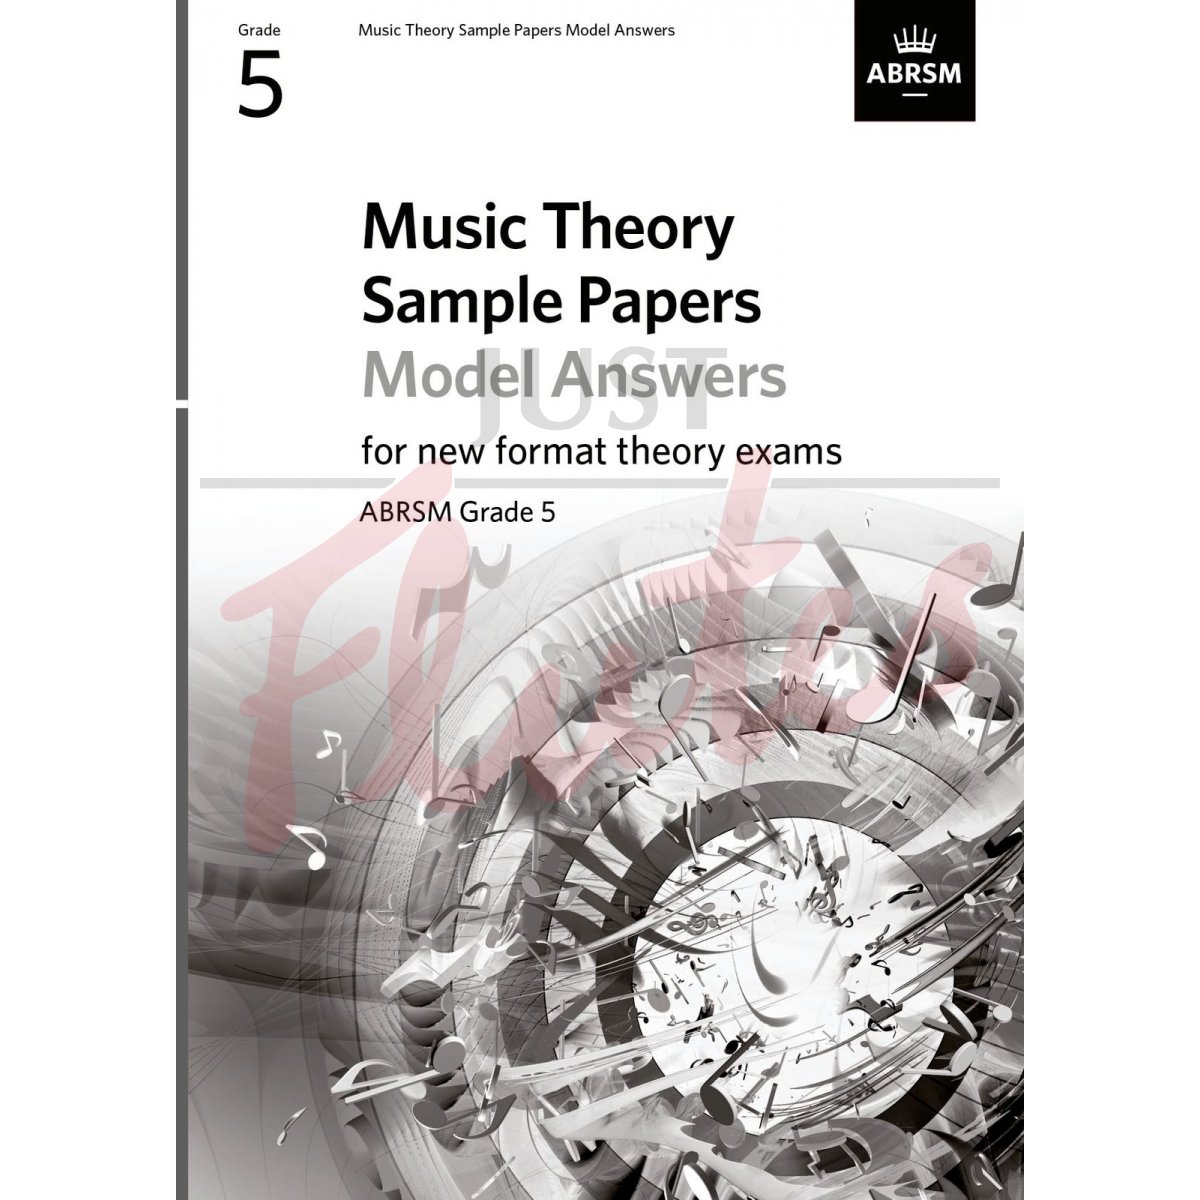 Music Theory Sample Papers Grade 5 - Model Answers